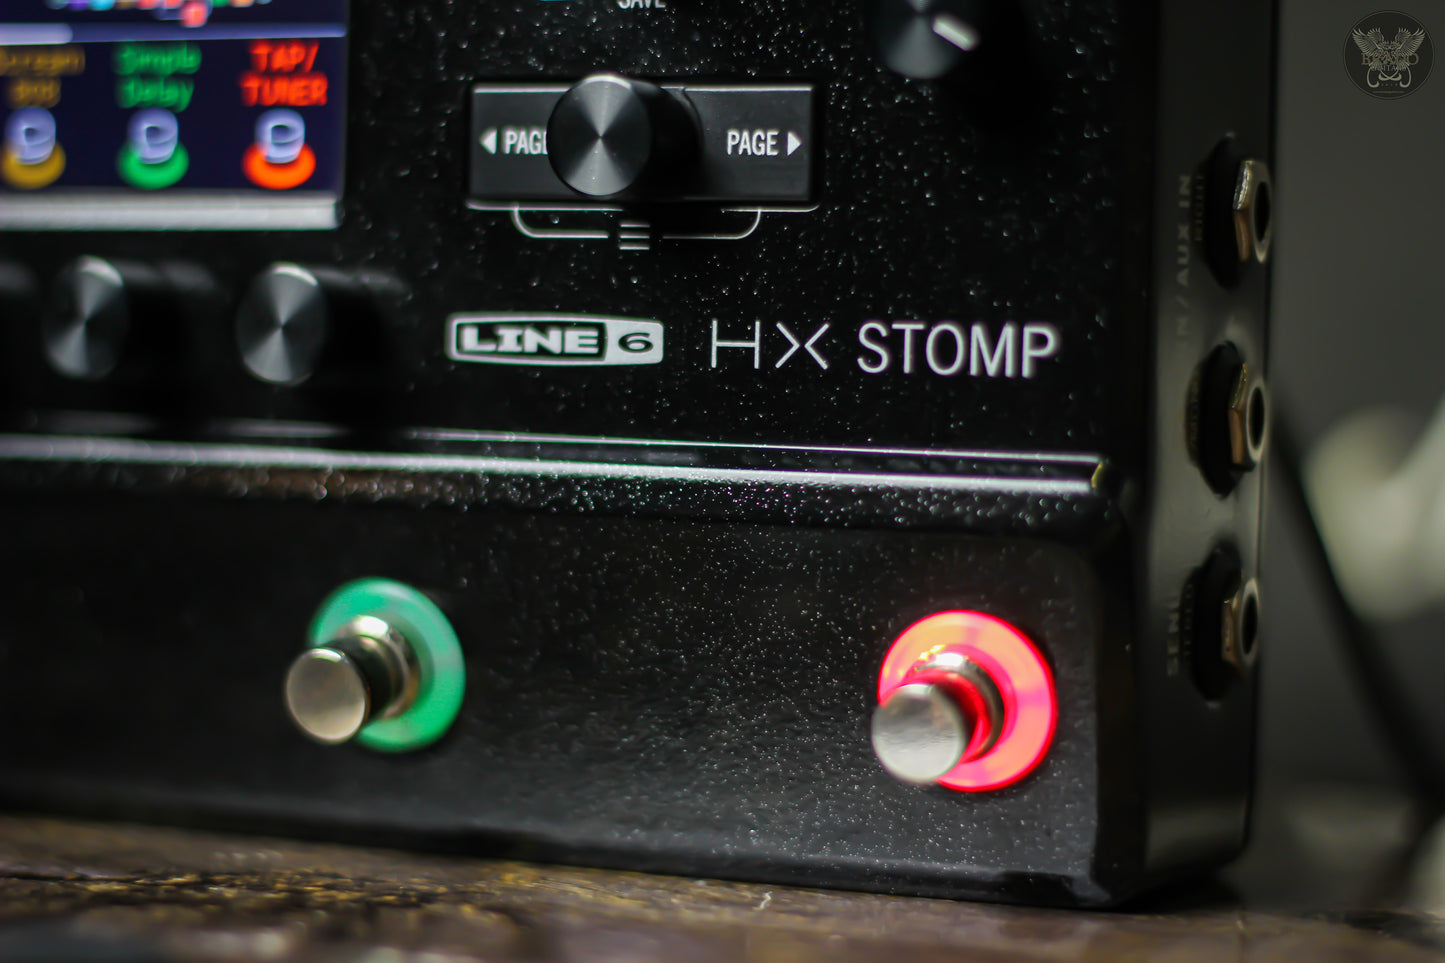 LINE 6 HX STOMP COMPACT AMP & MULTI EFFECTS PROCESSOR (USED)